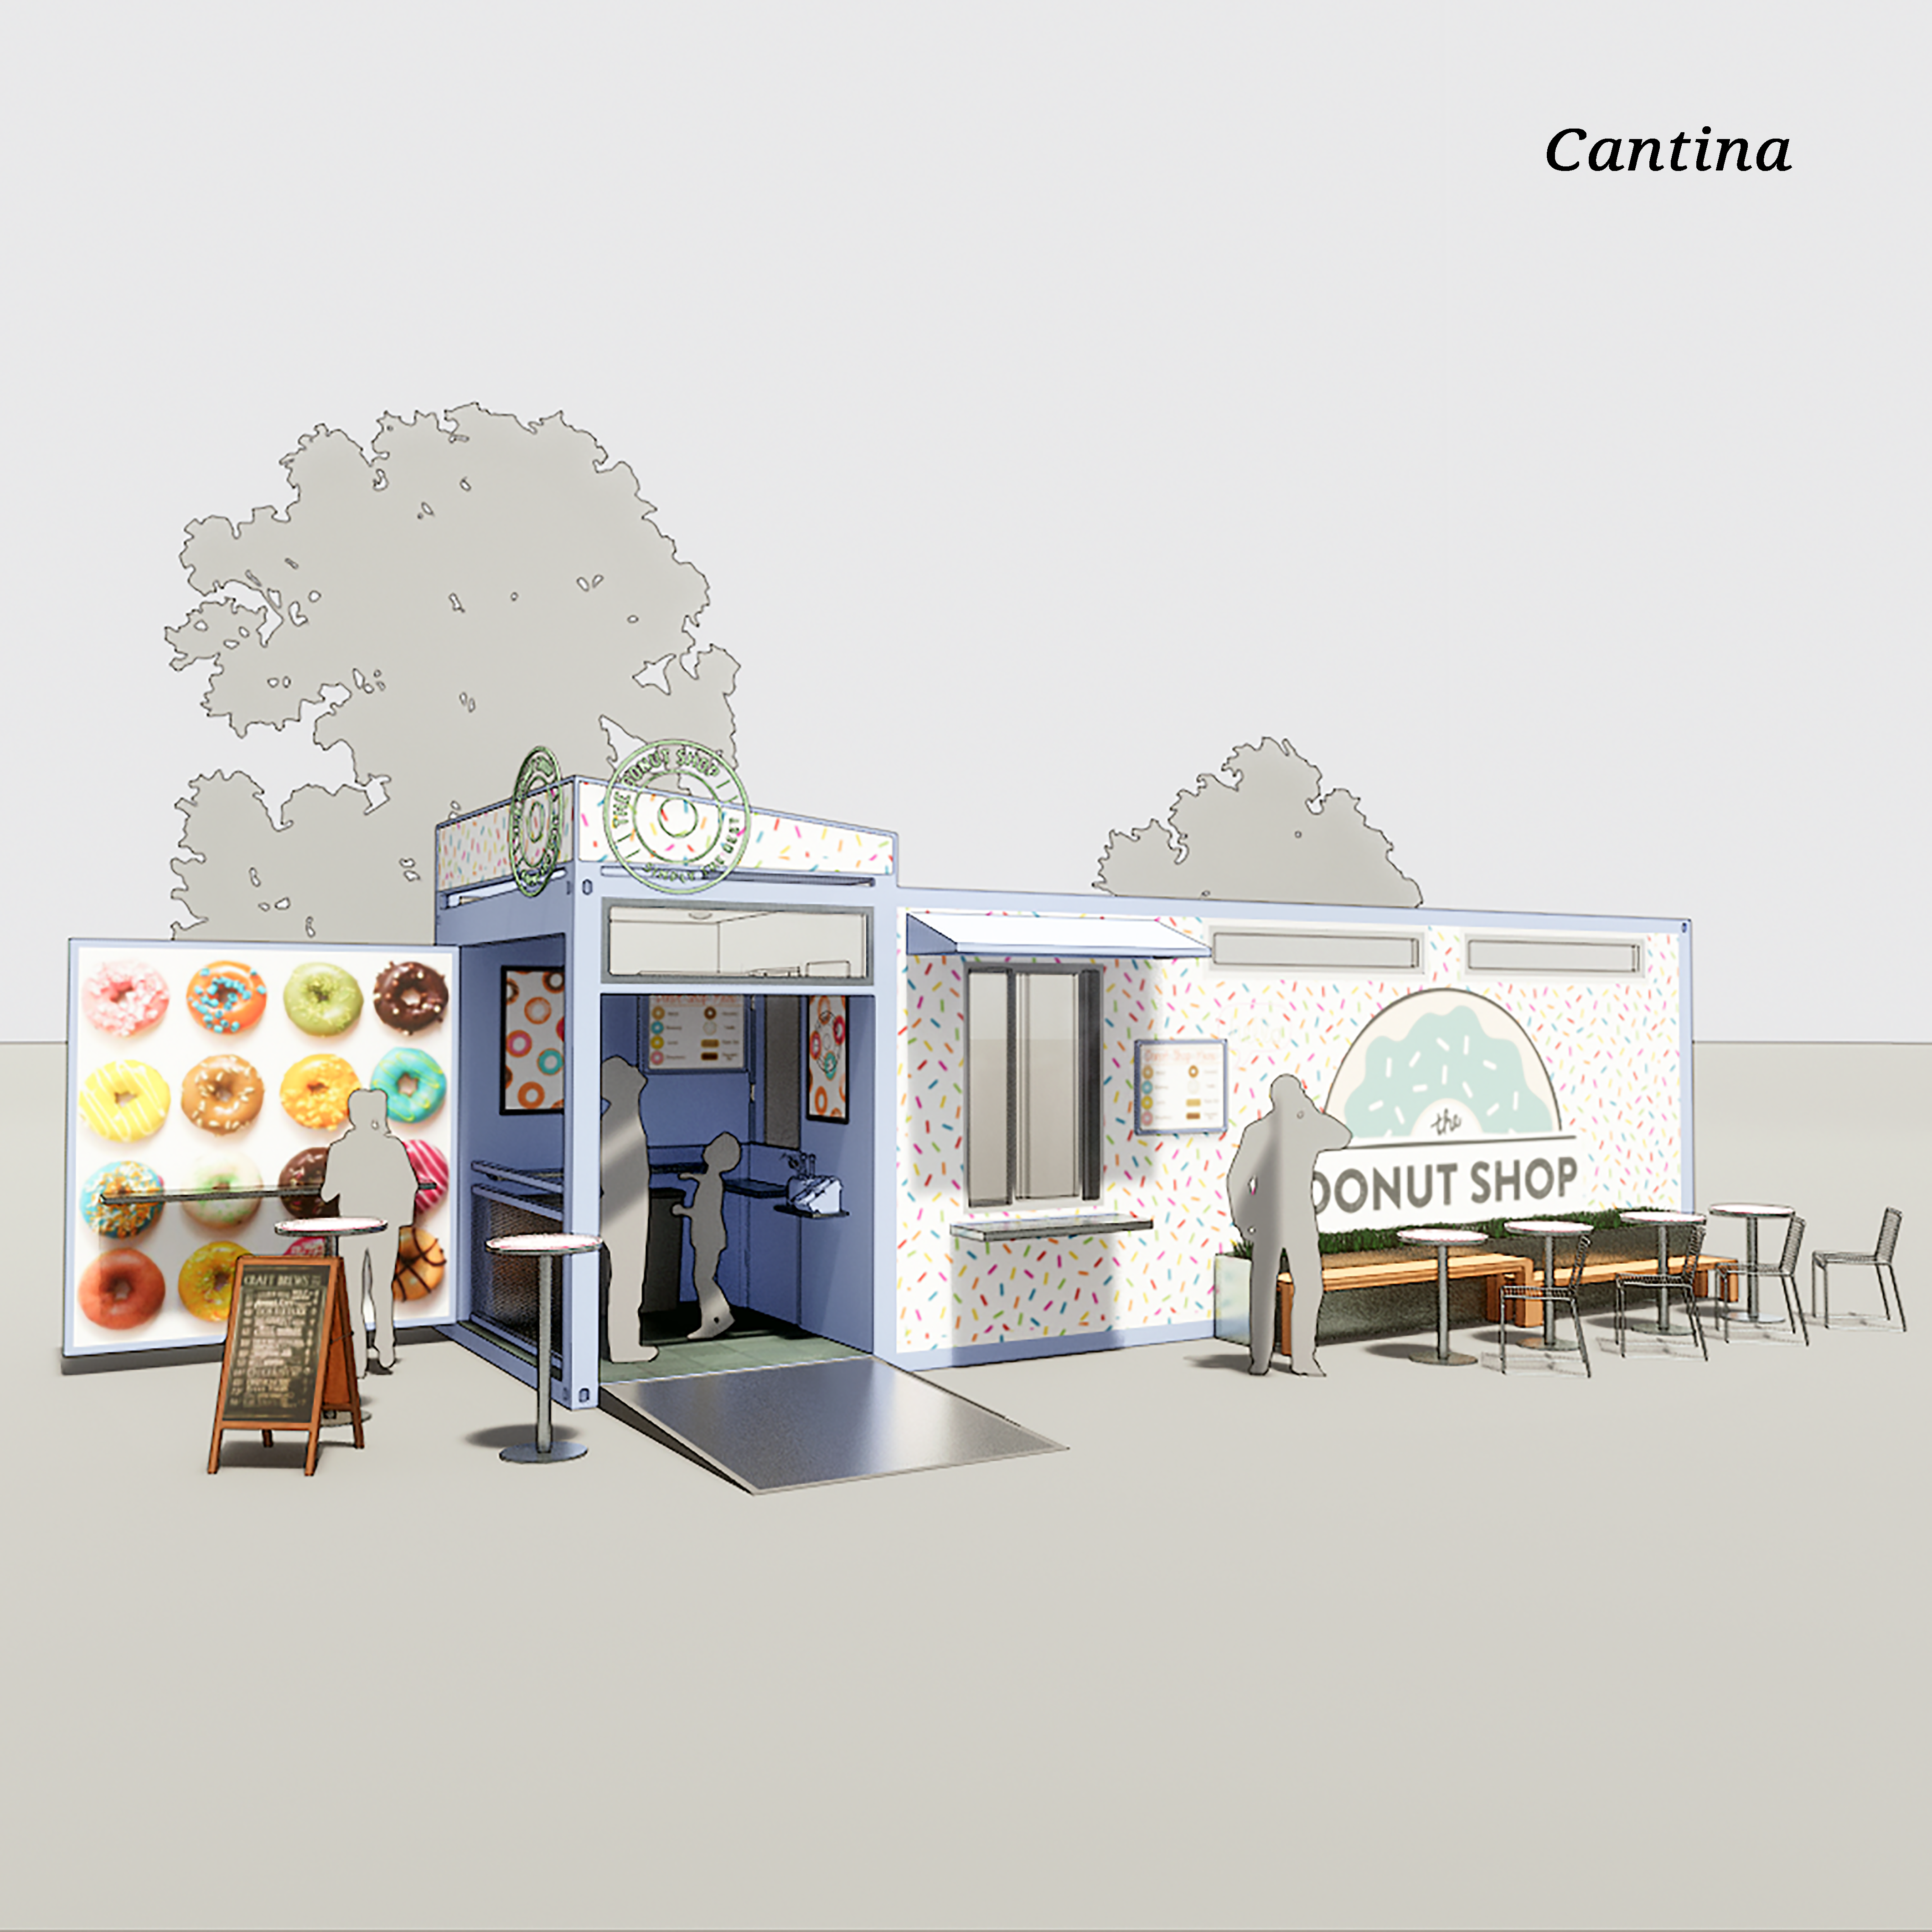 New-Cantina-r0.png